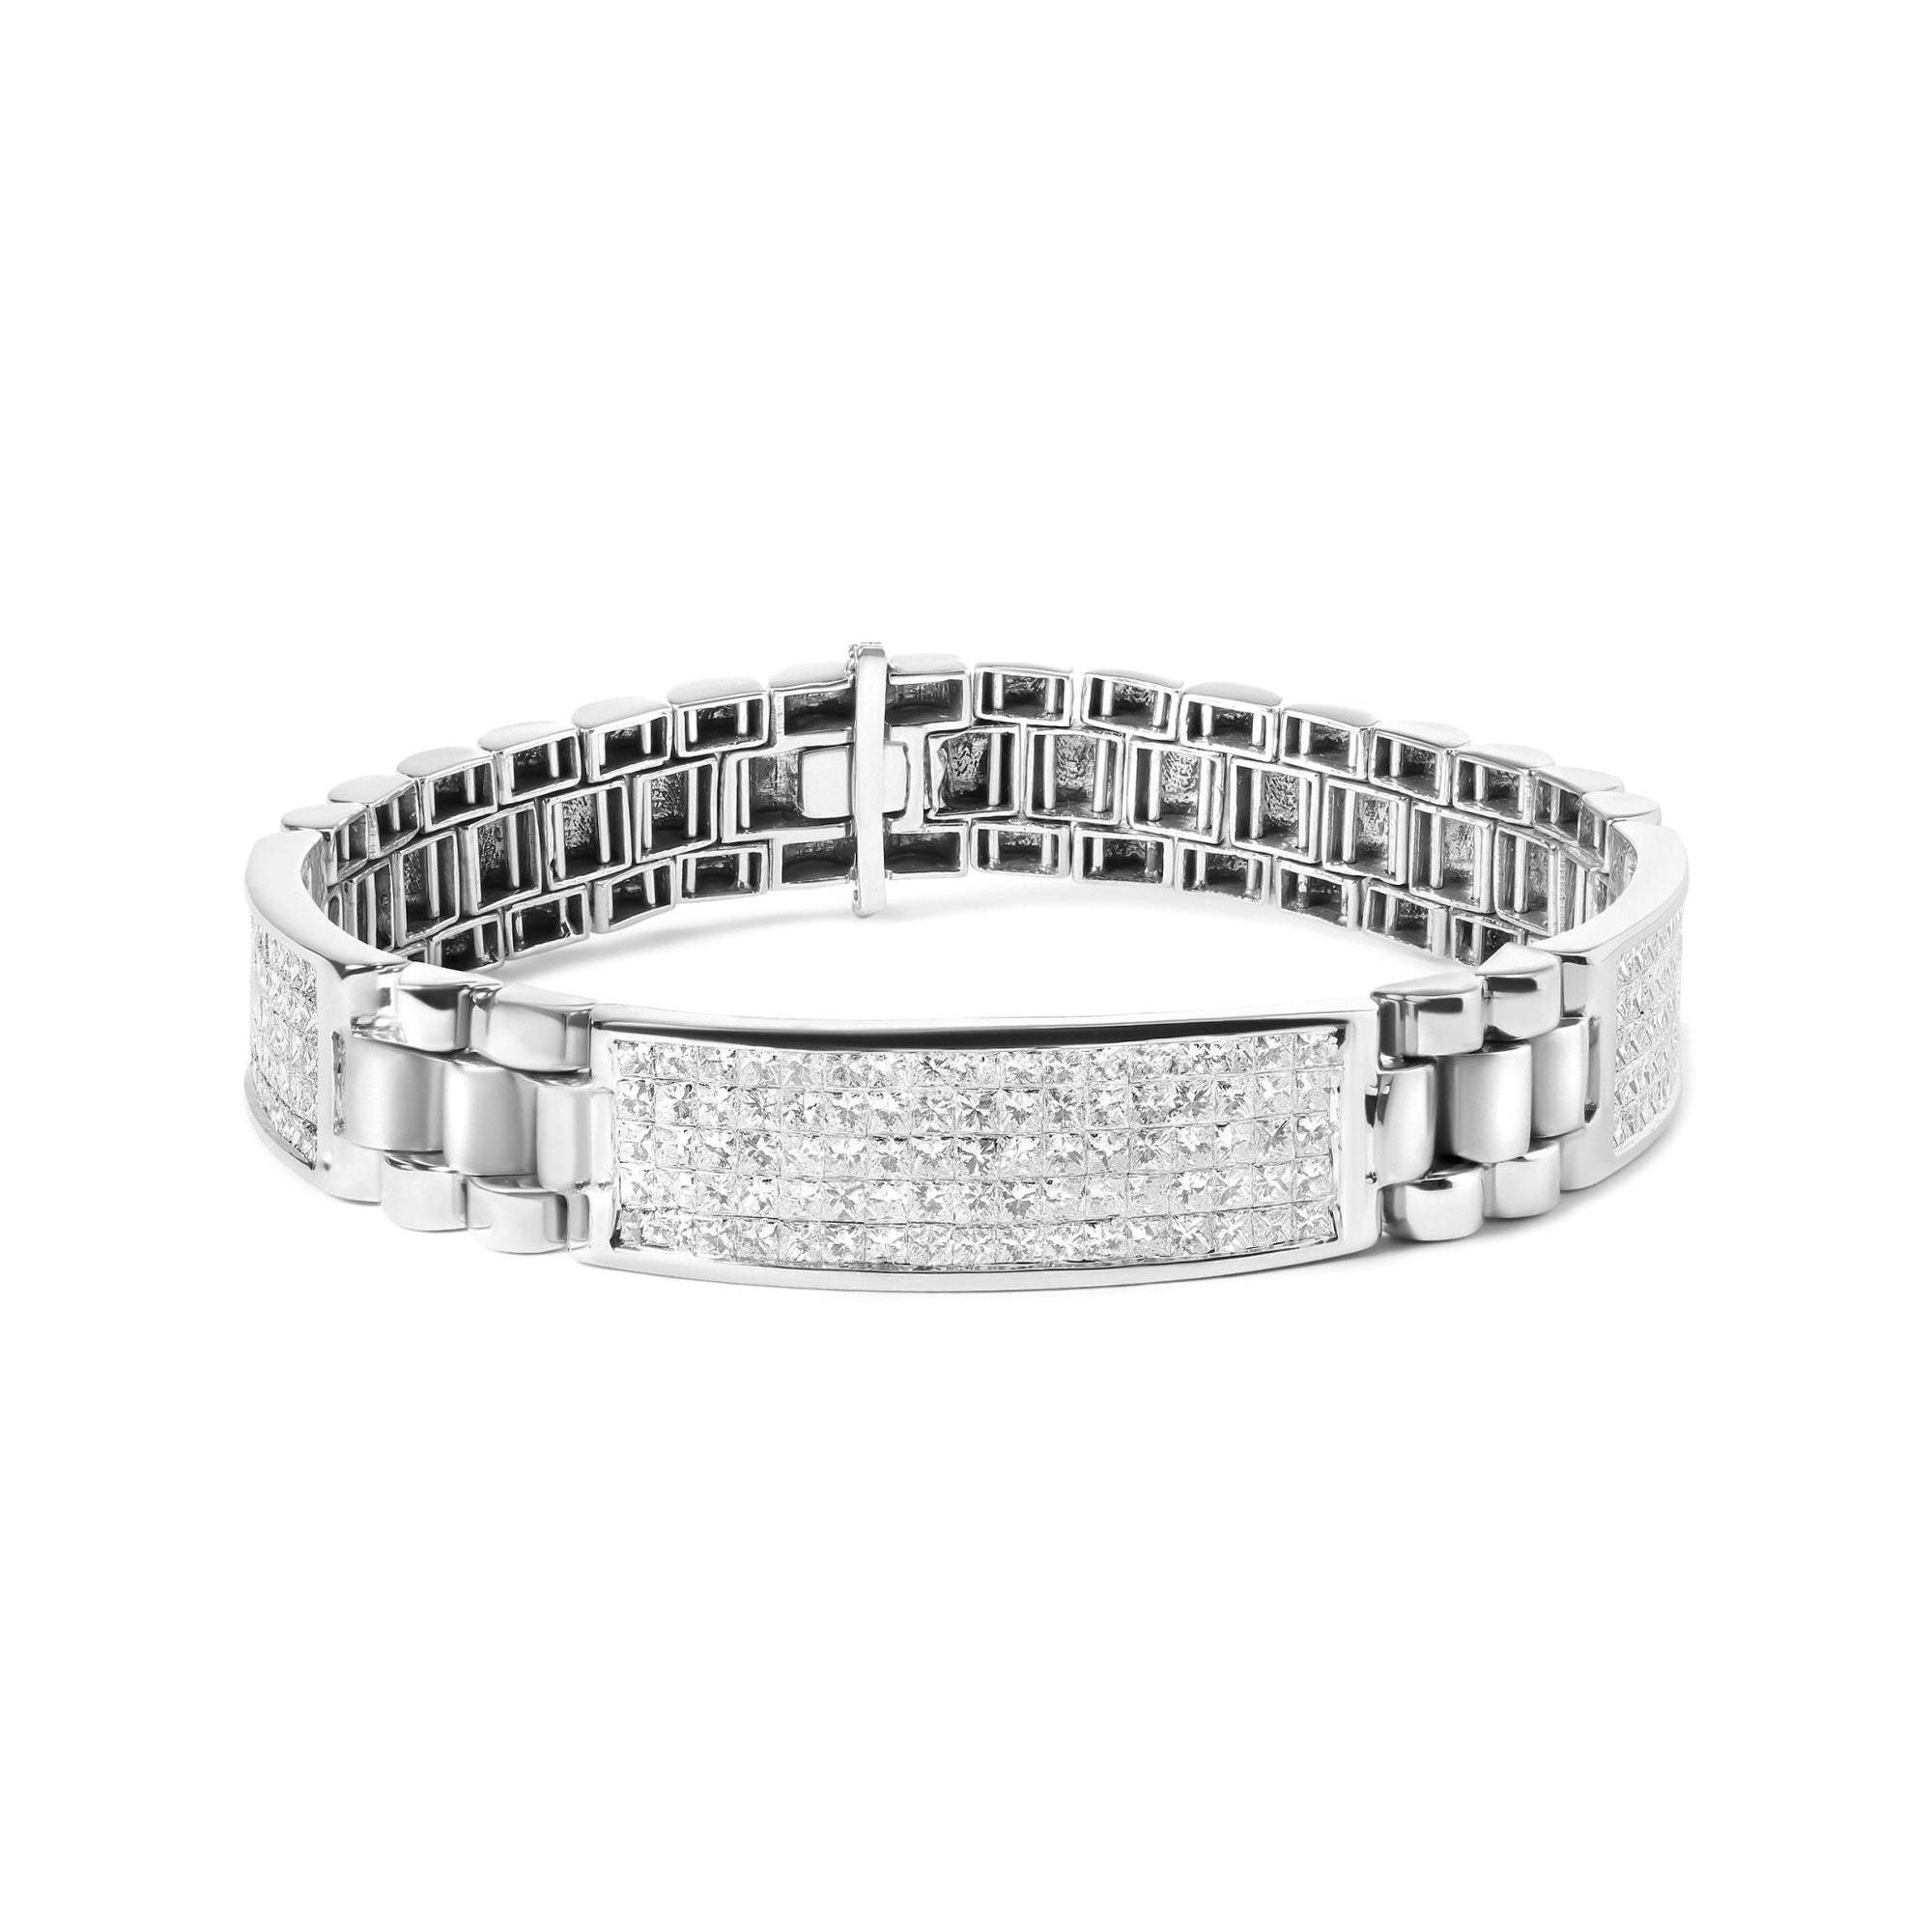 14K White Gold 12.0 Cttw Men's Invisible Set Princess Diamond Tennis Bracelet (G-H Color, VS1-VS2 Clarity) - Size 8.5" Inches - LinkagejewelrydesignLinkagejewelrydesign